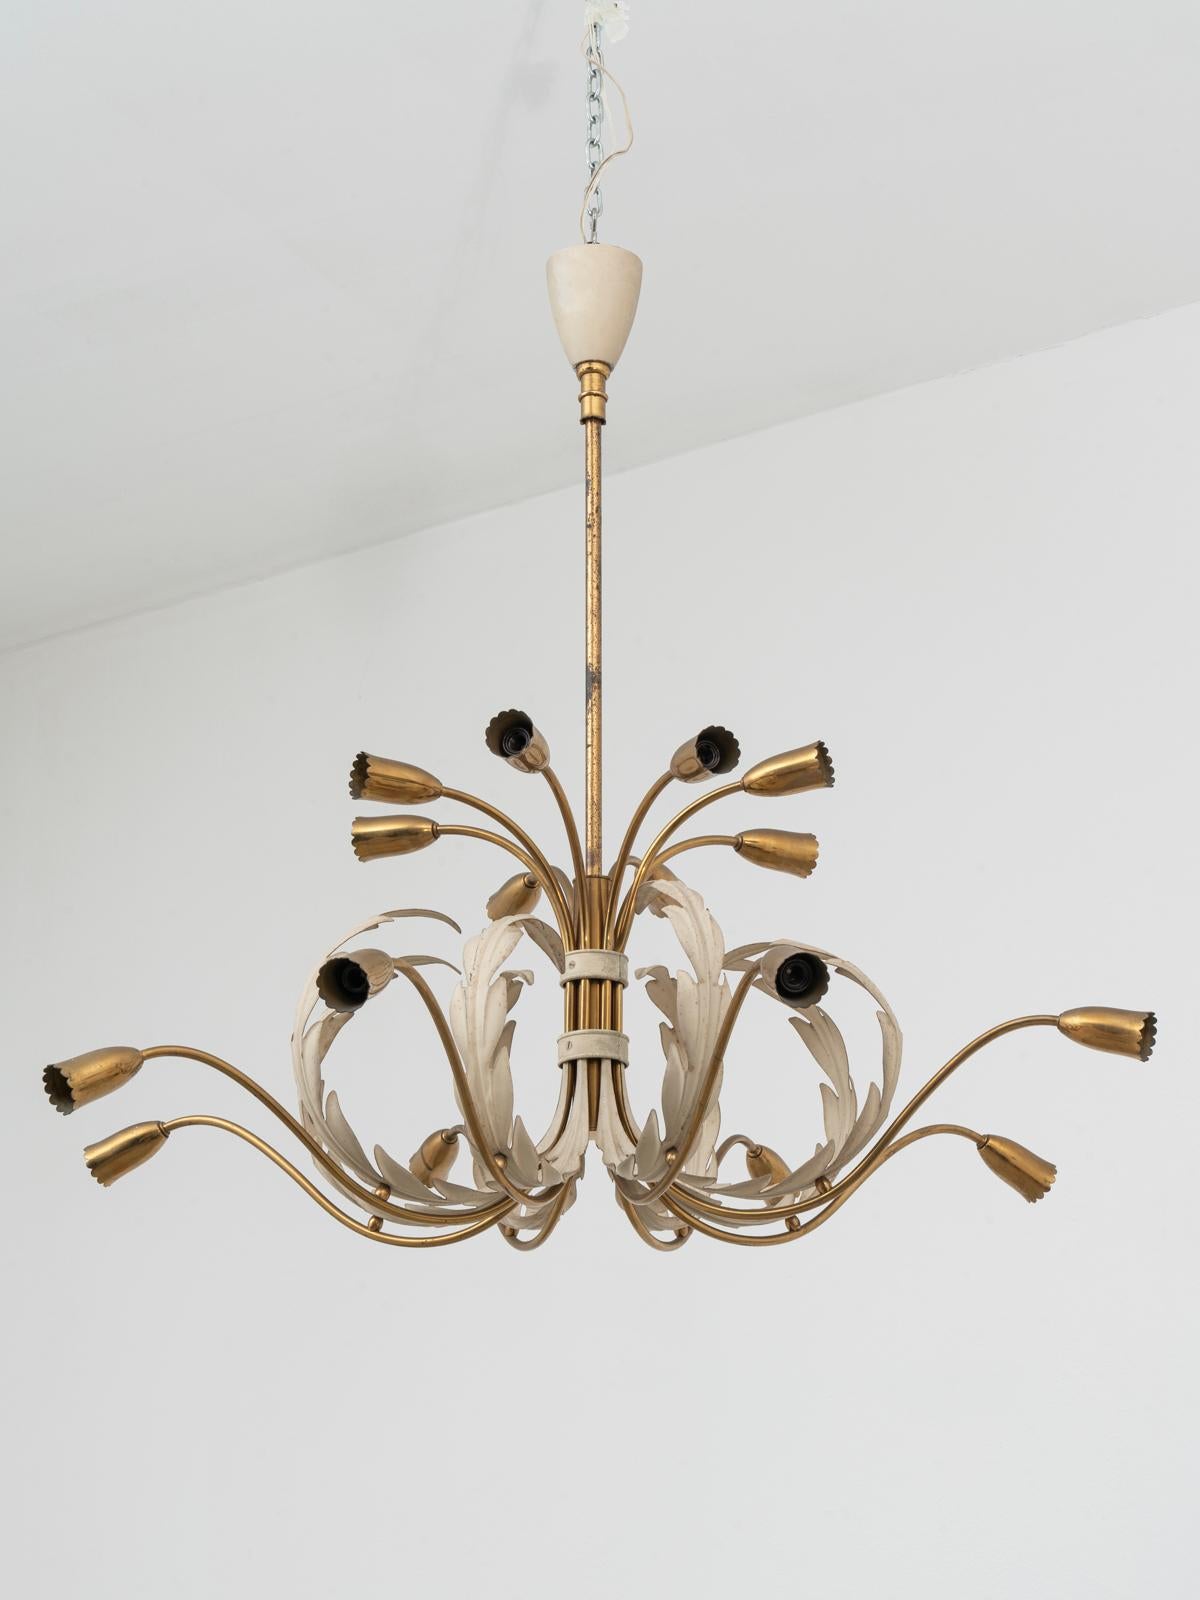 Important Italian decorative chandelier by Strada Milano, with a floral motif and a Sputnik layout.
Strada was a manufacturer in Milan. They produced several pieces designed by Guglielmo Ulrich.
It features 16 lights (E14 lightbulbs). All